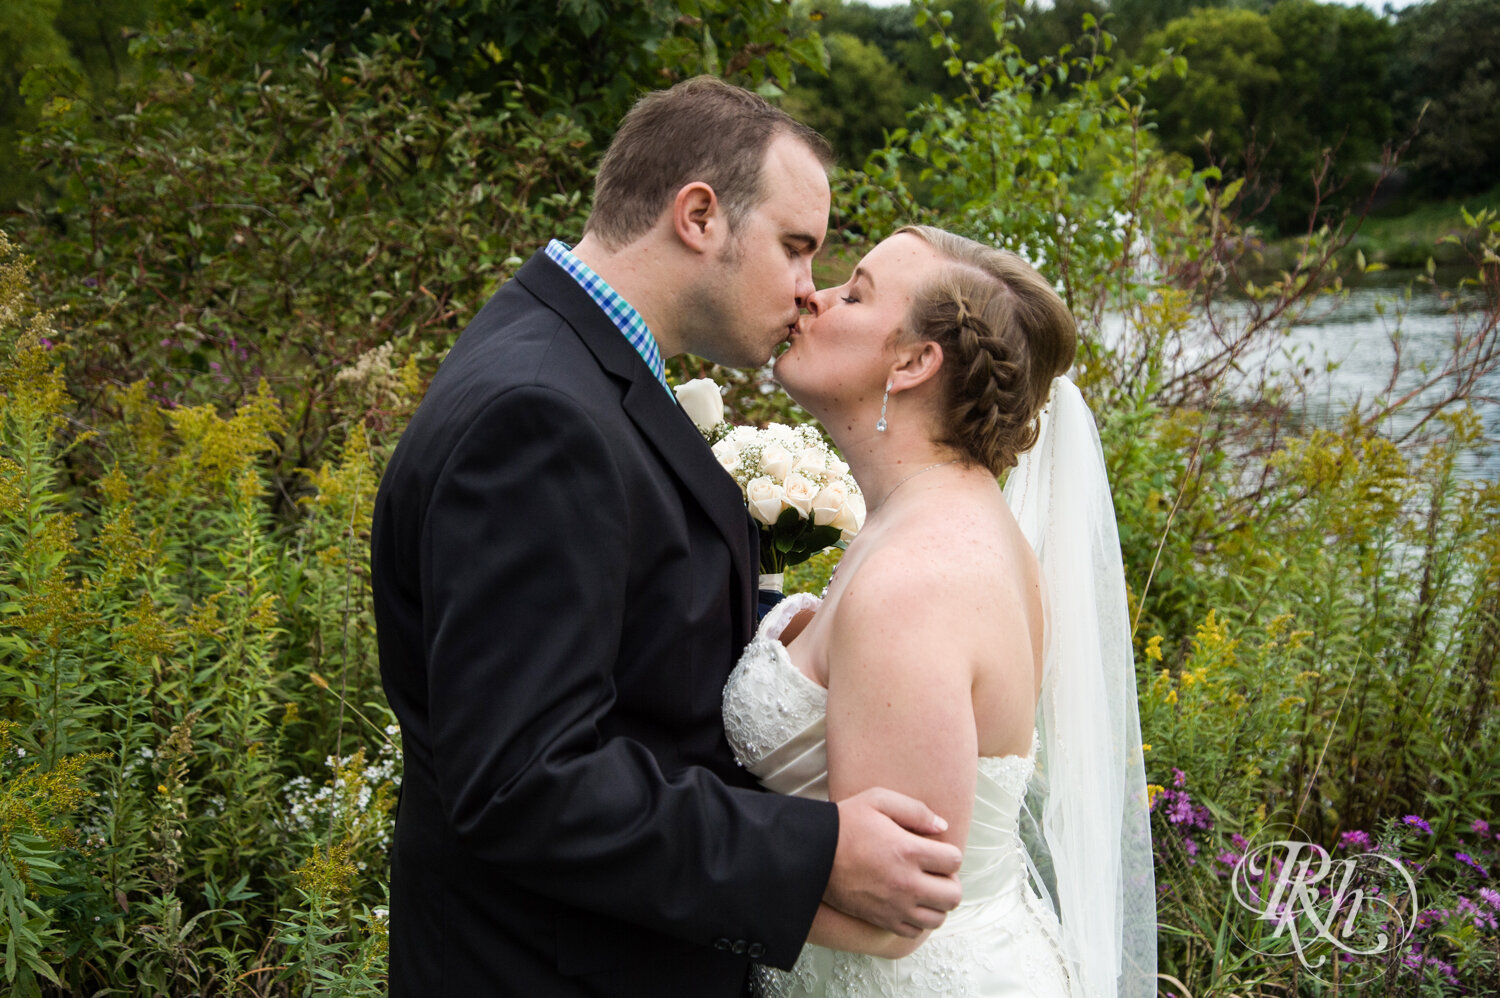 Bride and groom kiss by wildflowers at Eagan Community Center in Eagan, Minnesota.